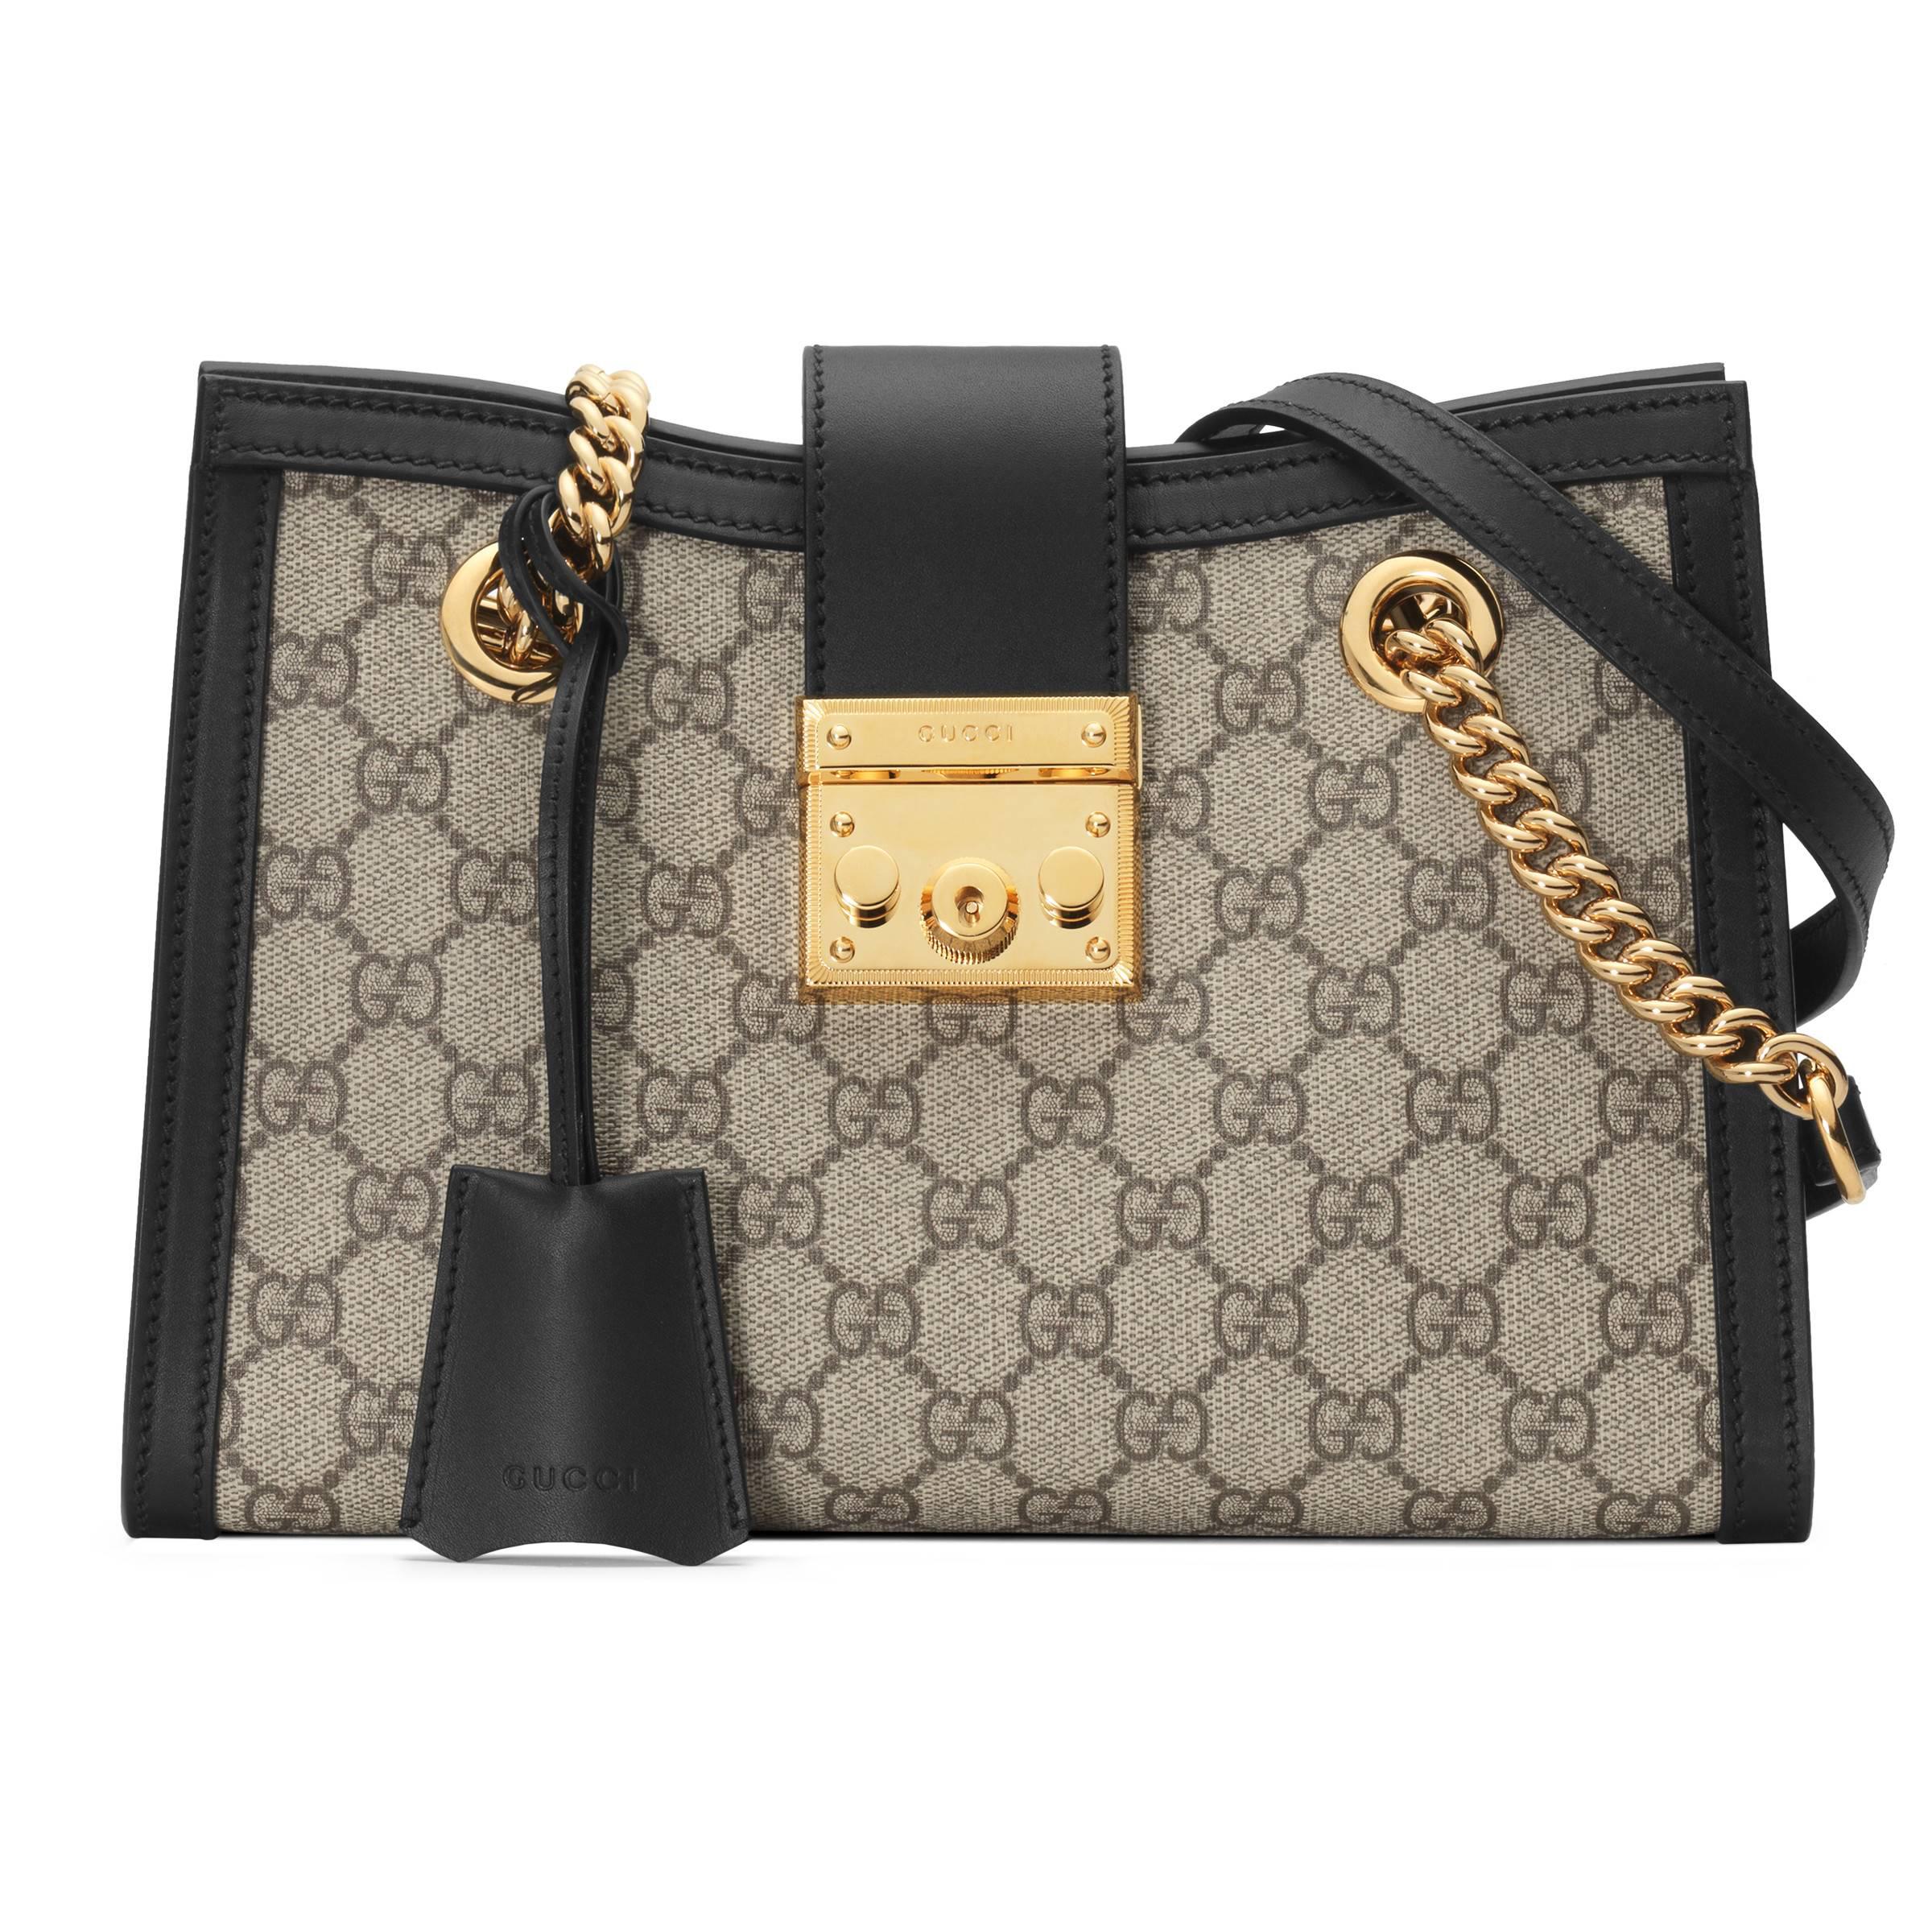  Gucci  Canvas Padlock  Small  GG Shoulder Bag in Beige 